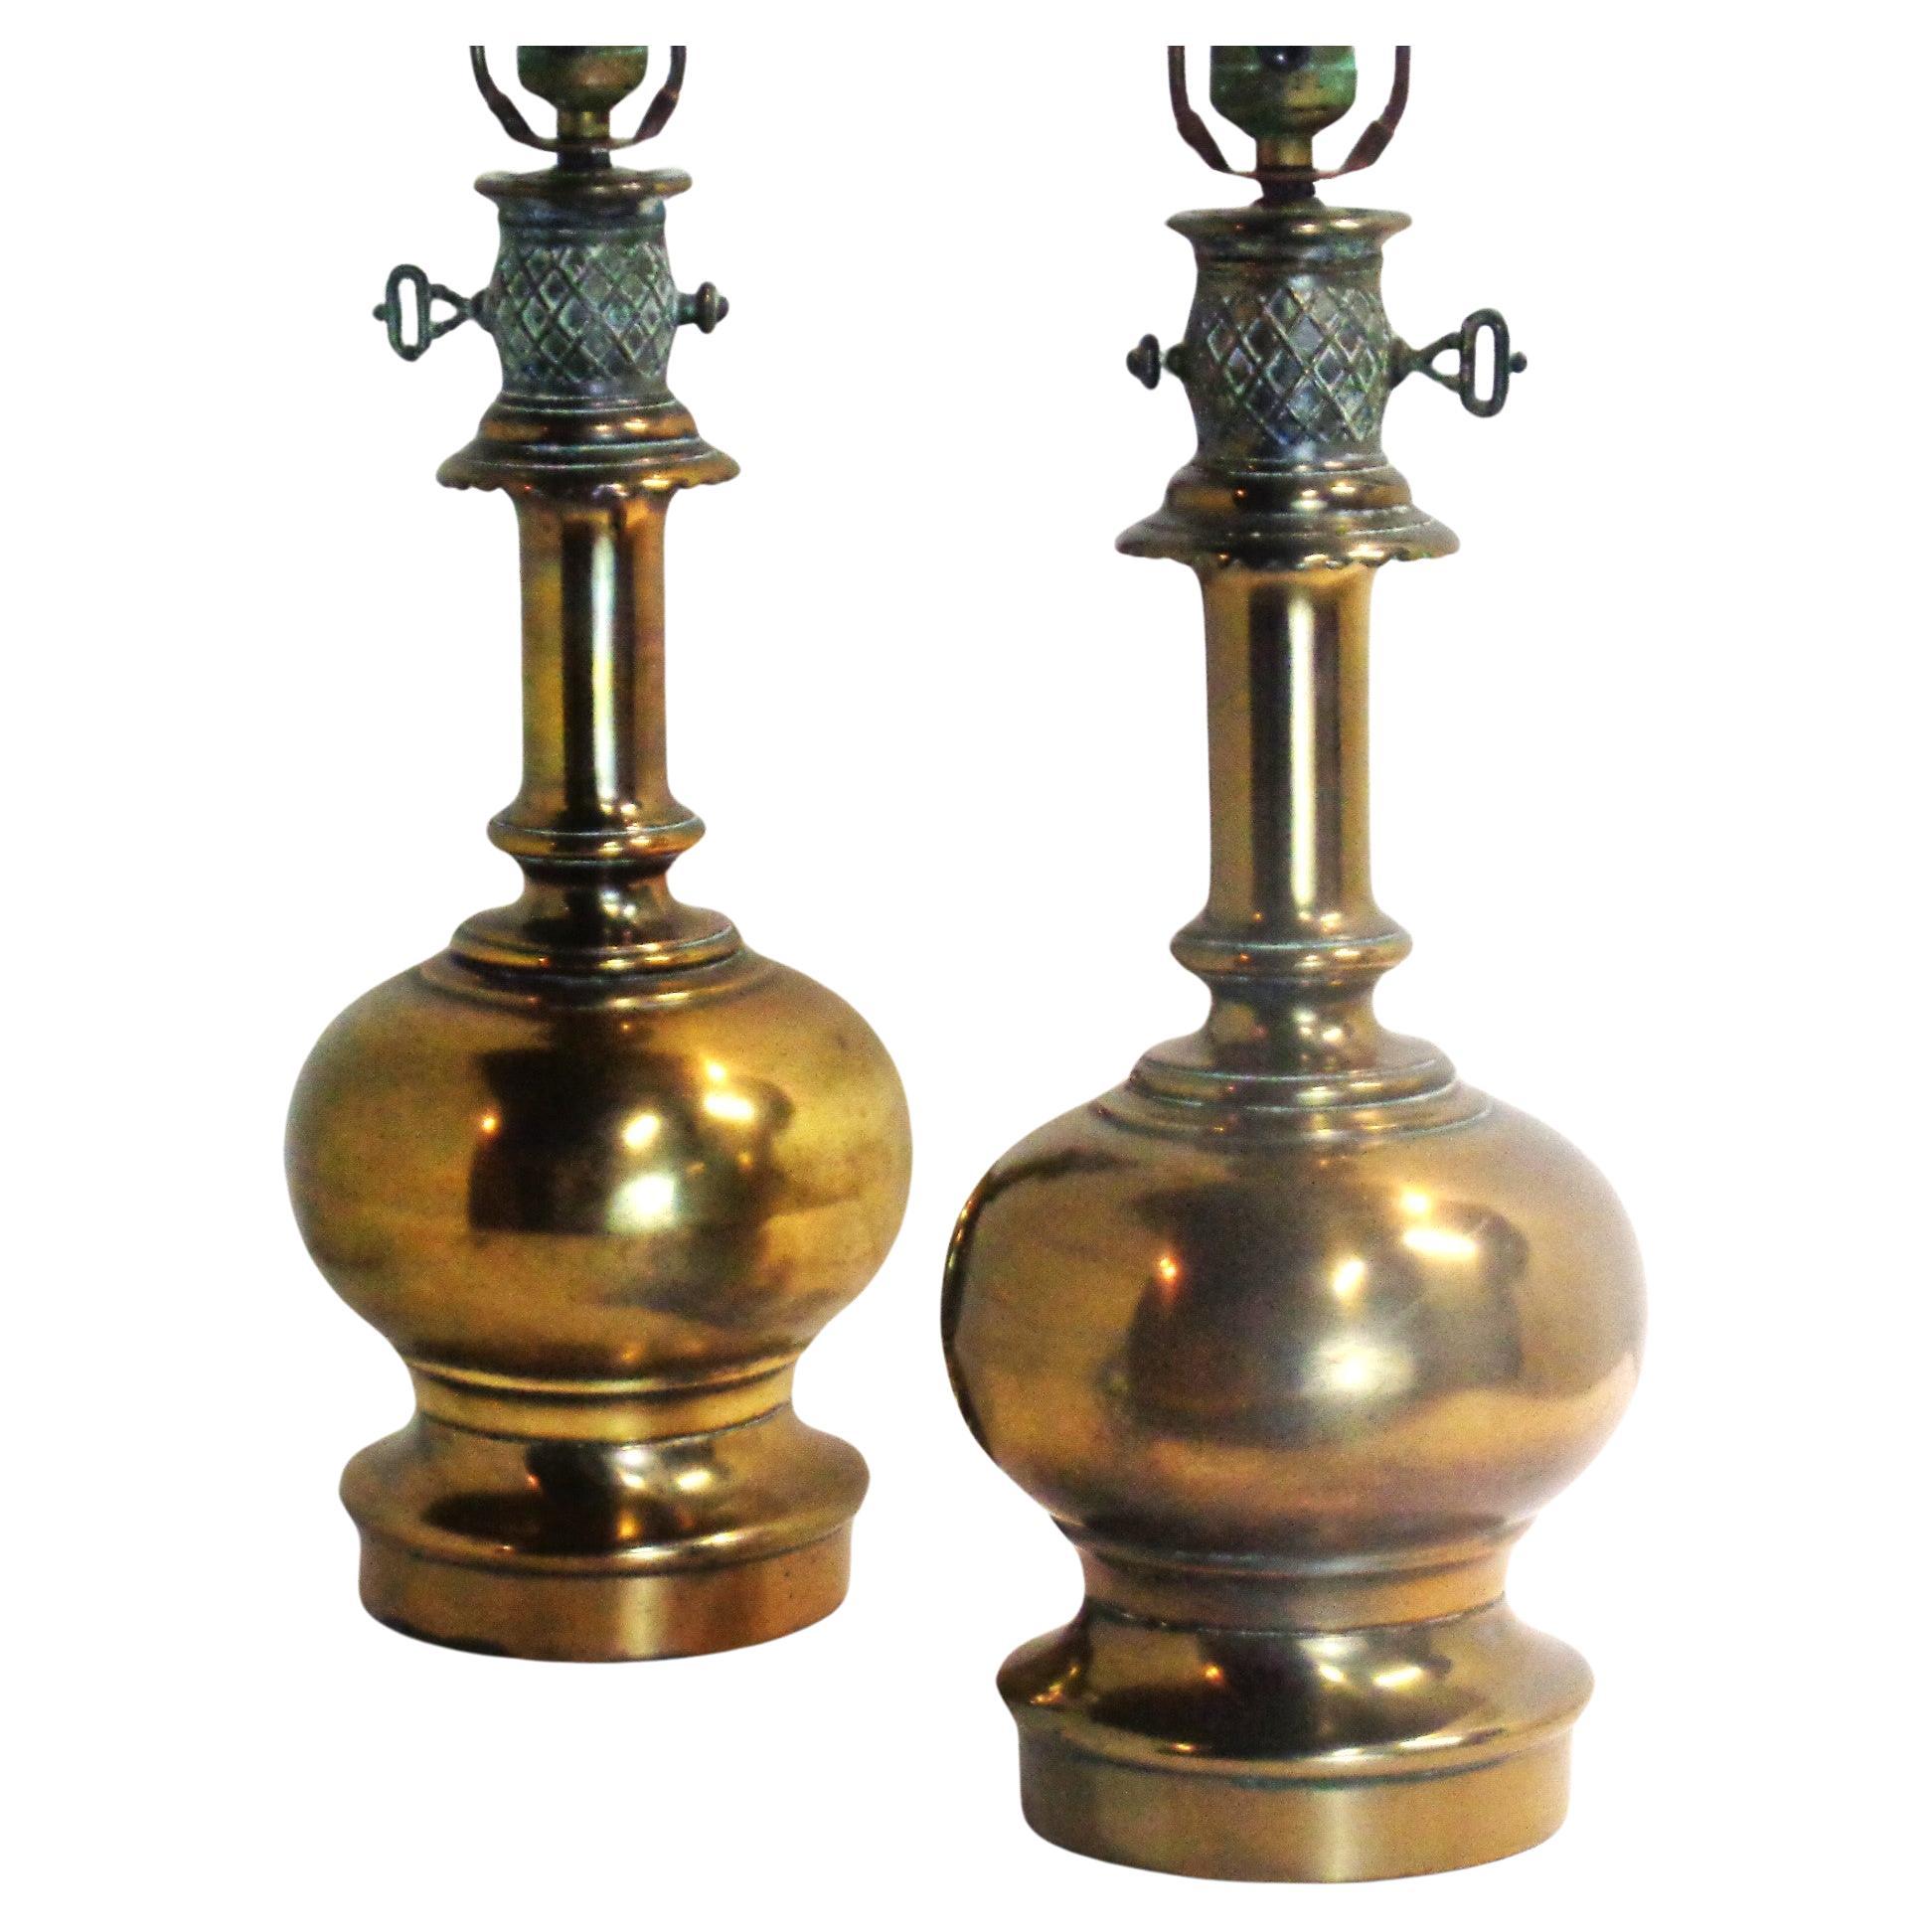 Pair of traditional English Regency style faux kerosene brass table lamps. Nicely aged patinated verdigris surface to nicely detailed decorative metal top posts with key. Great looking original big brass finials. Circa 1940's. Measurements - 29